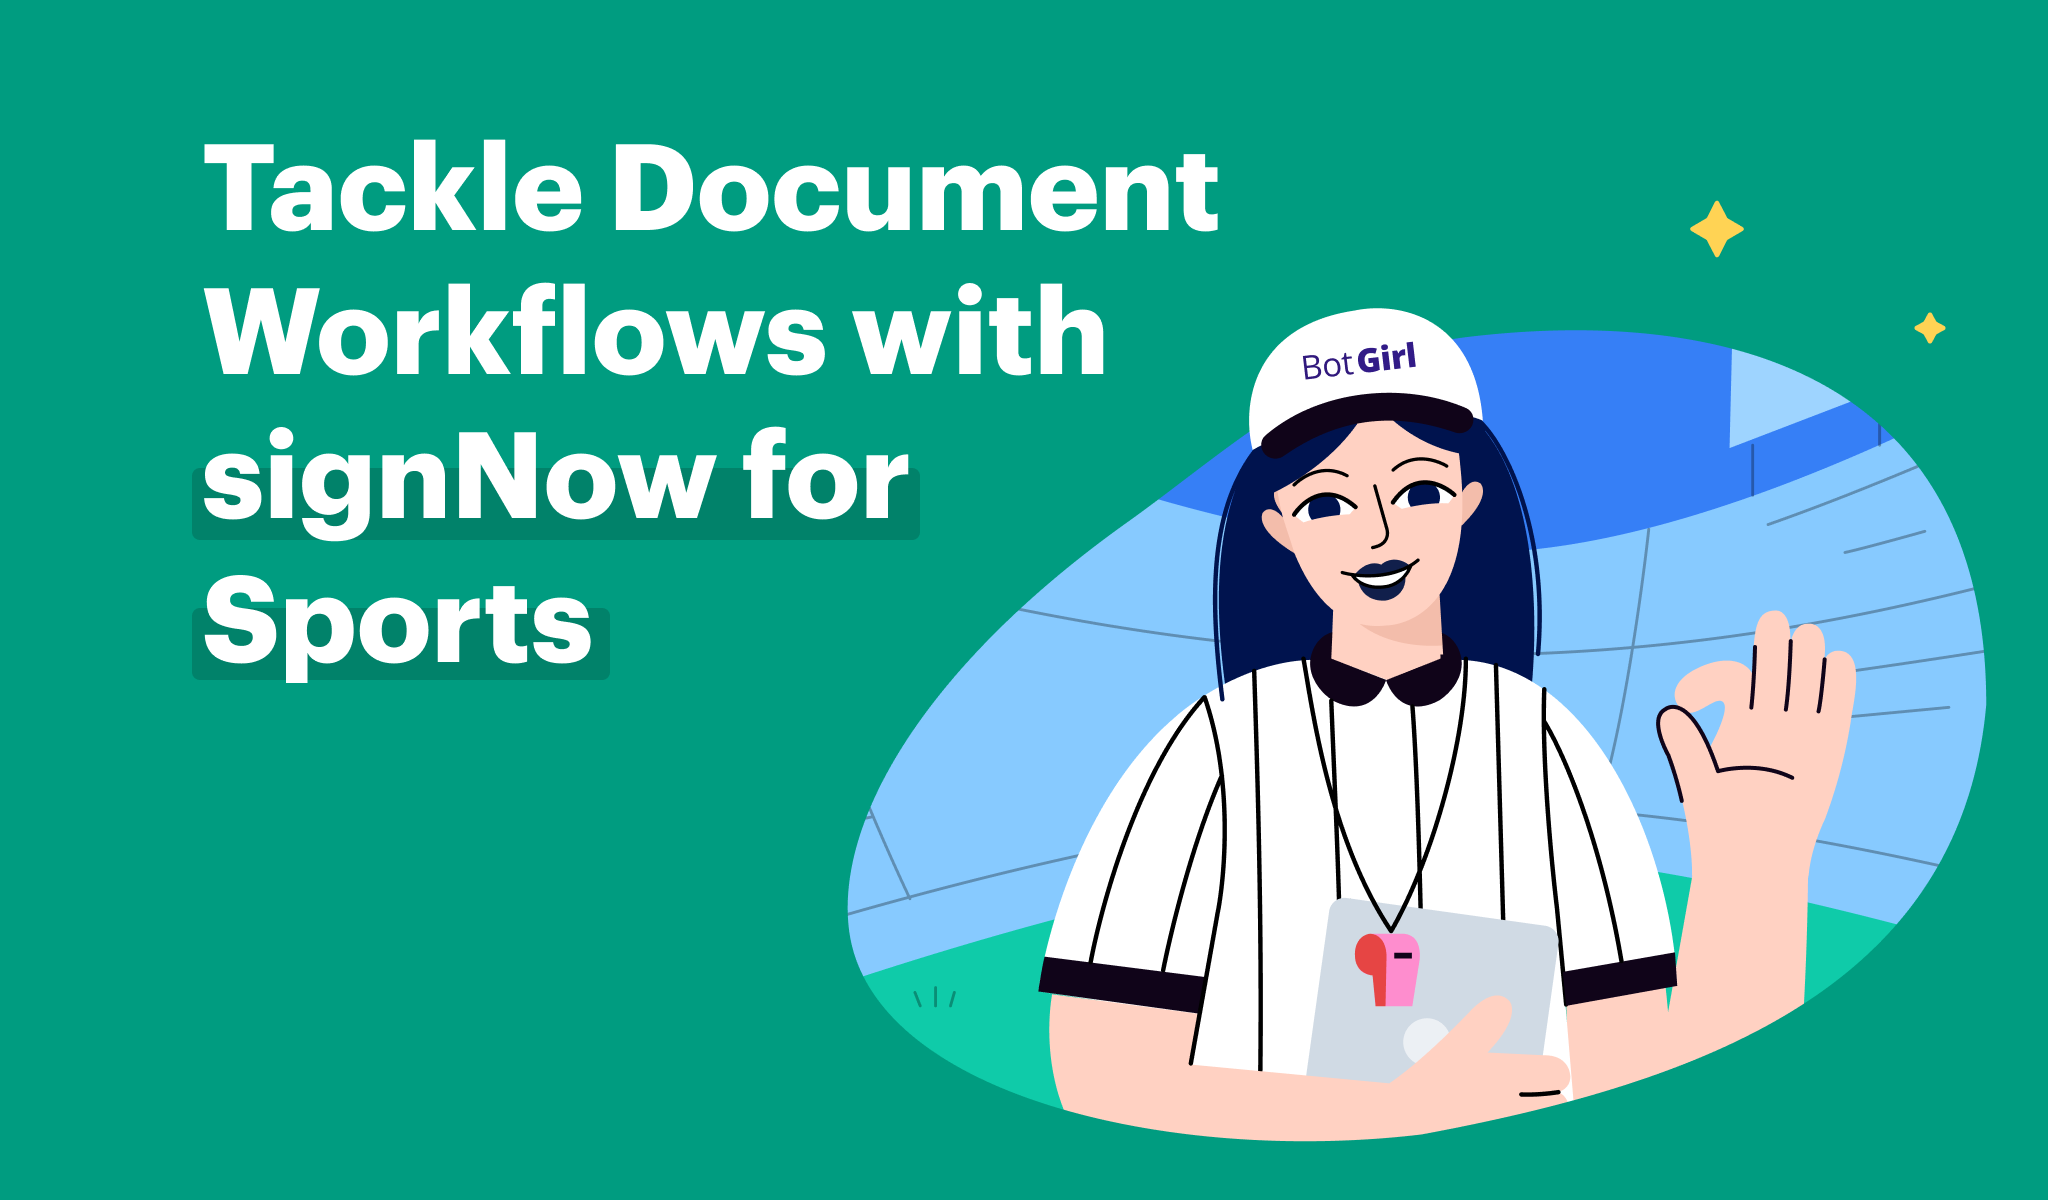 Tackle document workflows with signNow for Sports